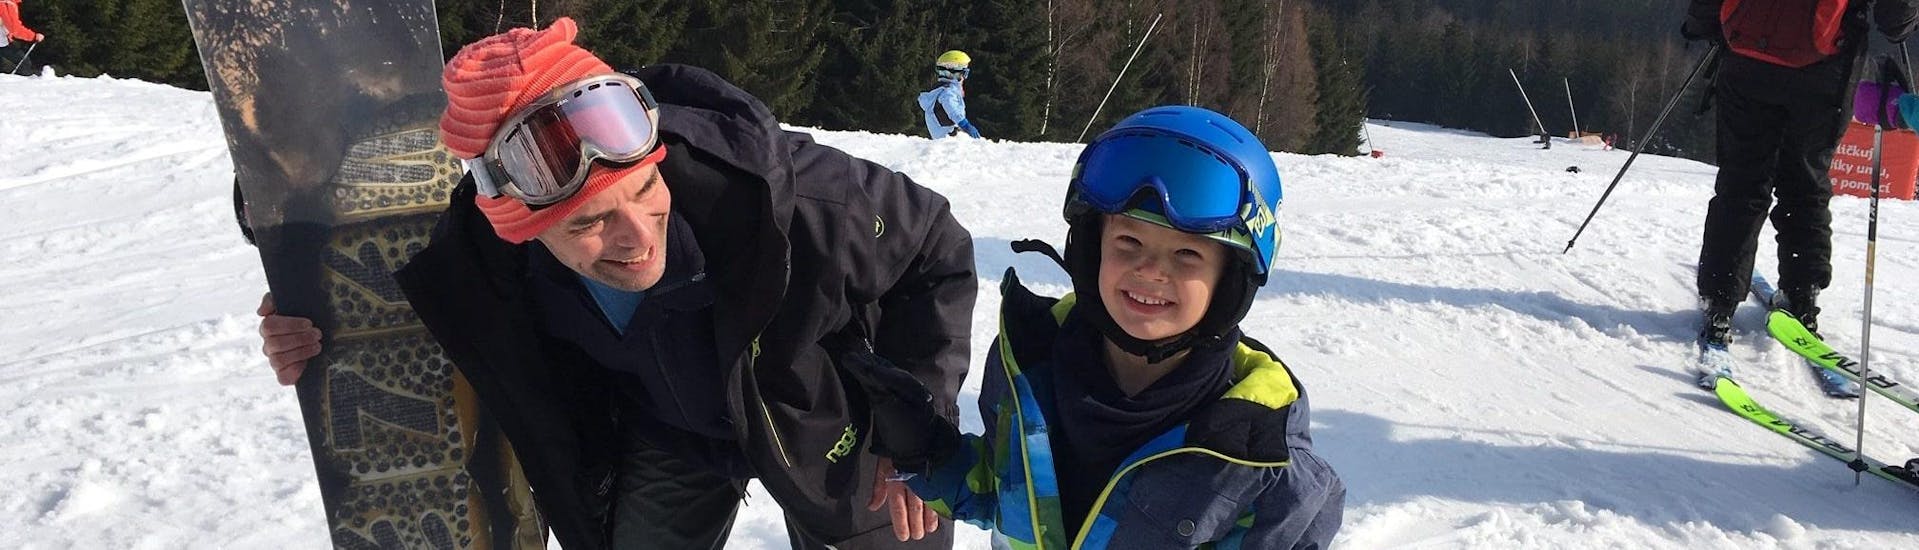 A small boy is enjoying the Private Ski Lessons for Kids - All Levels with his ski instructor from the ski school SnowMonkey.